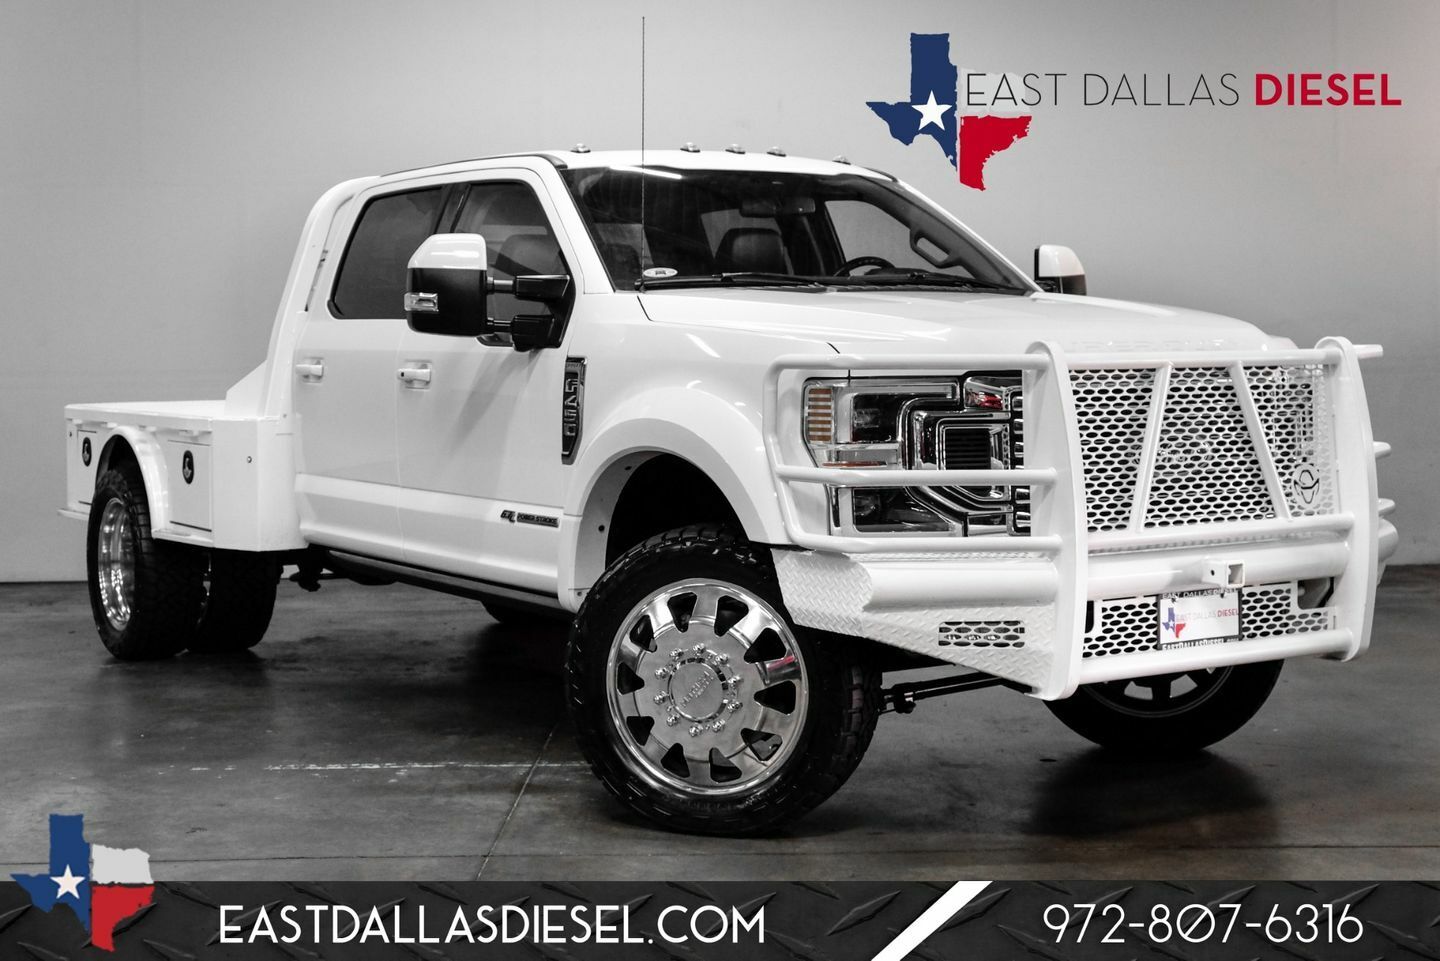 Oxford White Ford Super Duty F-450 Pickup with 22395 Miles available now!